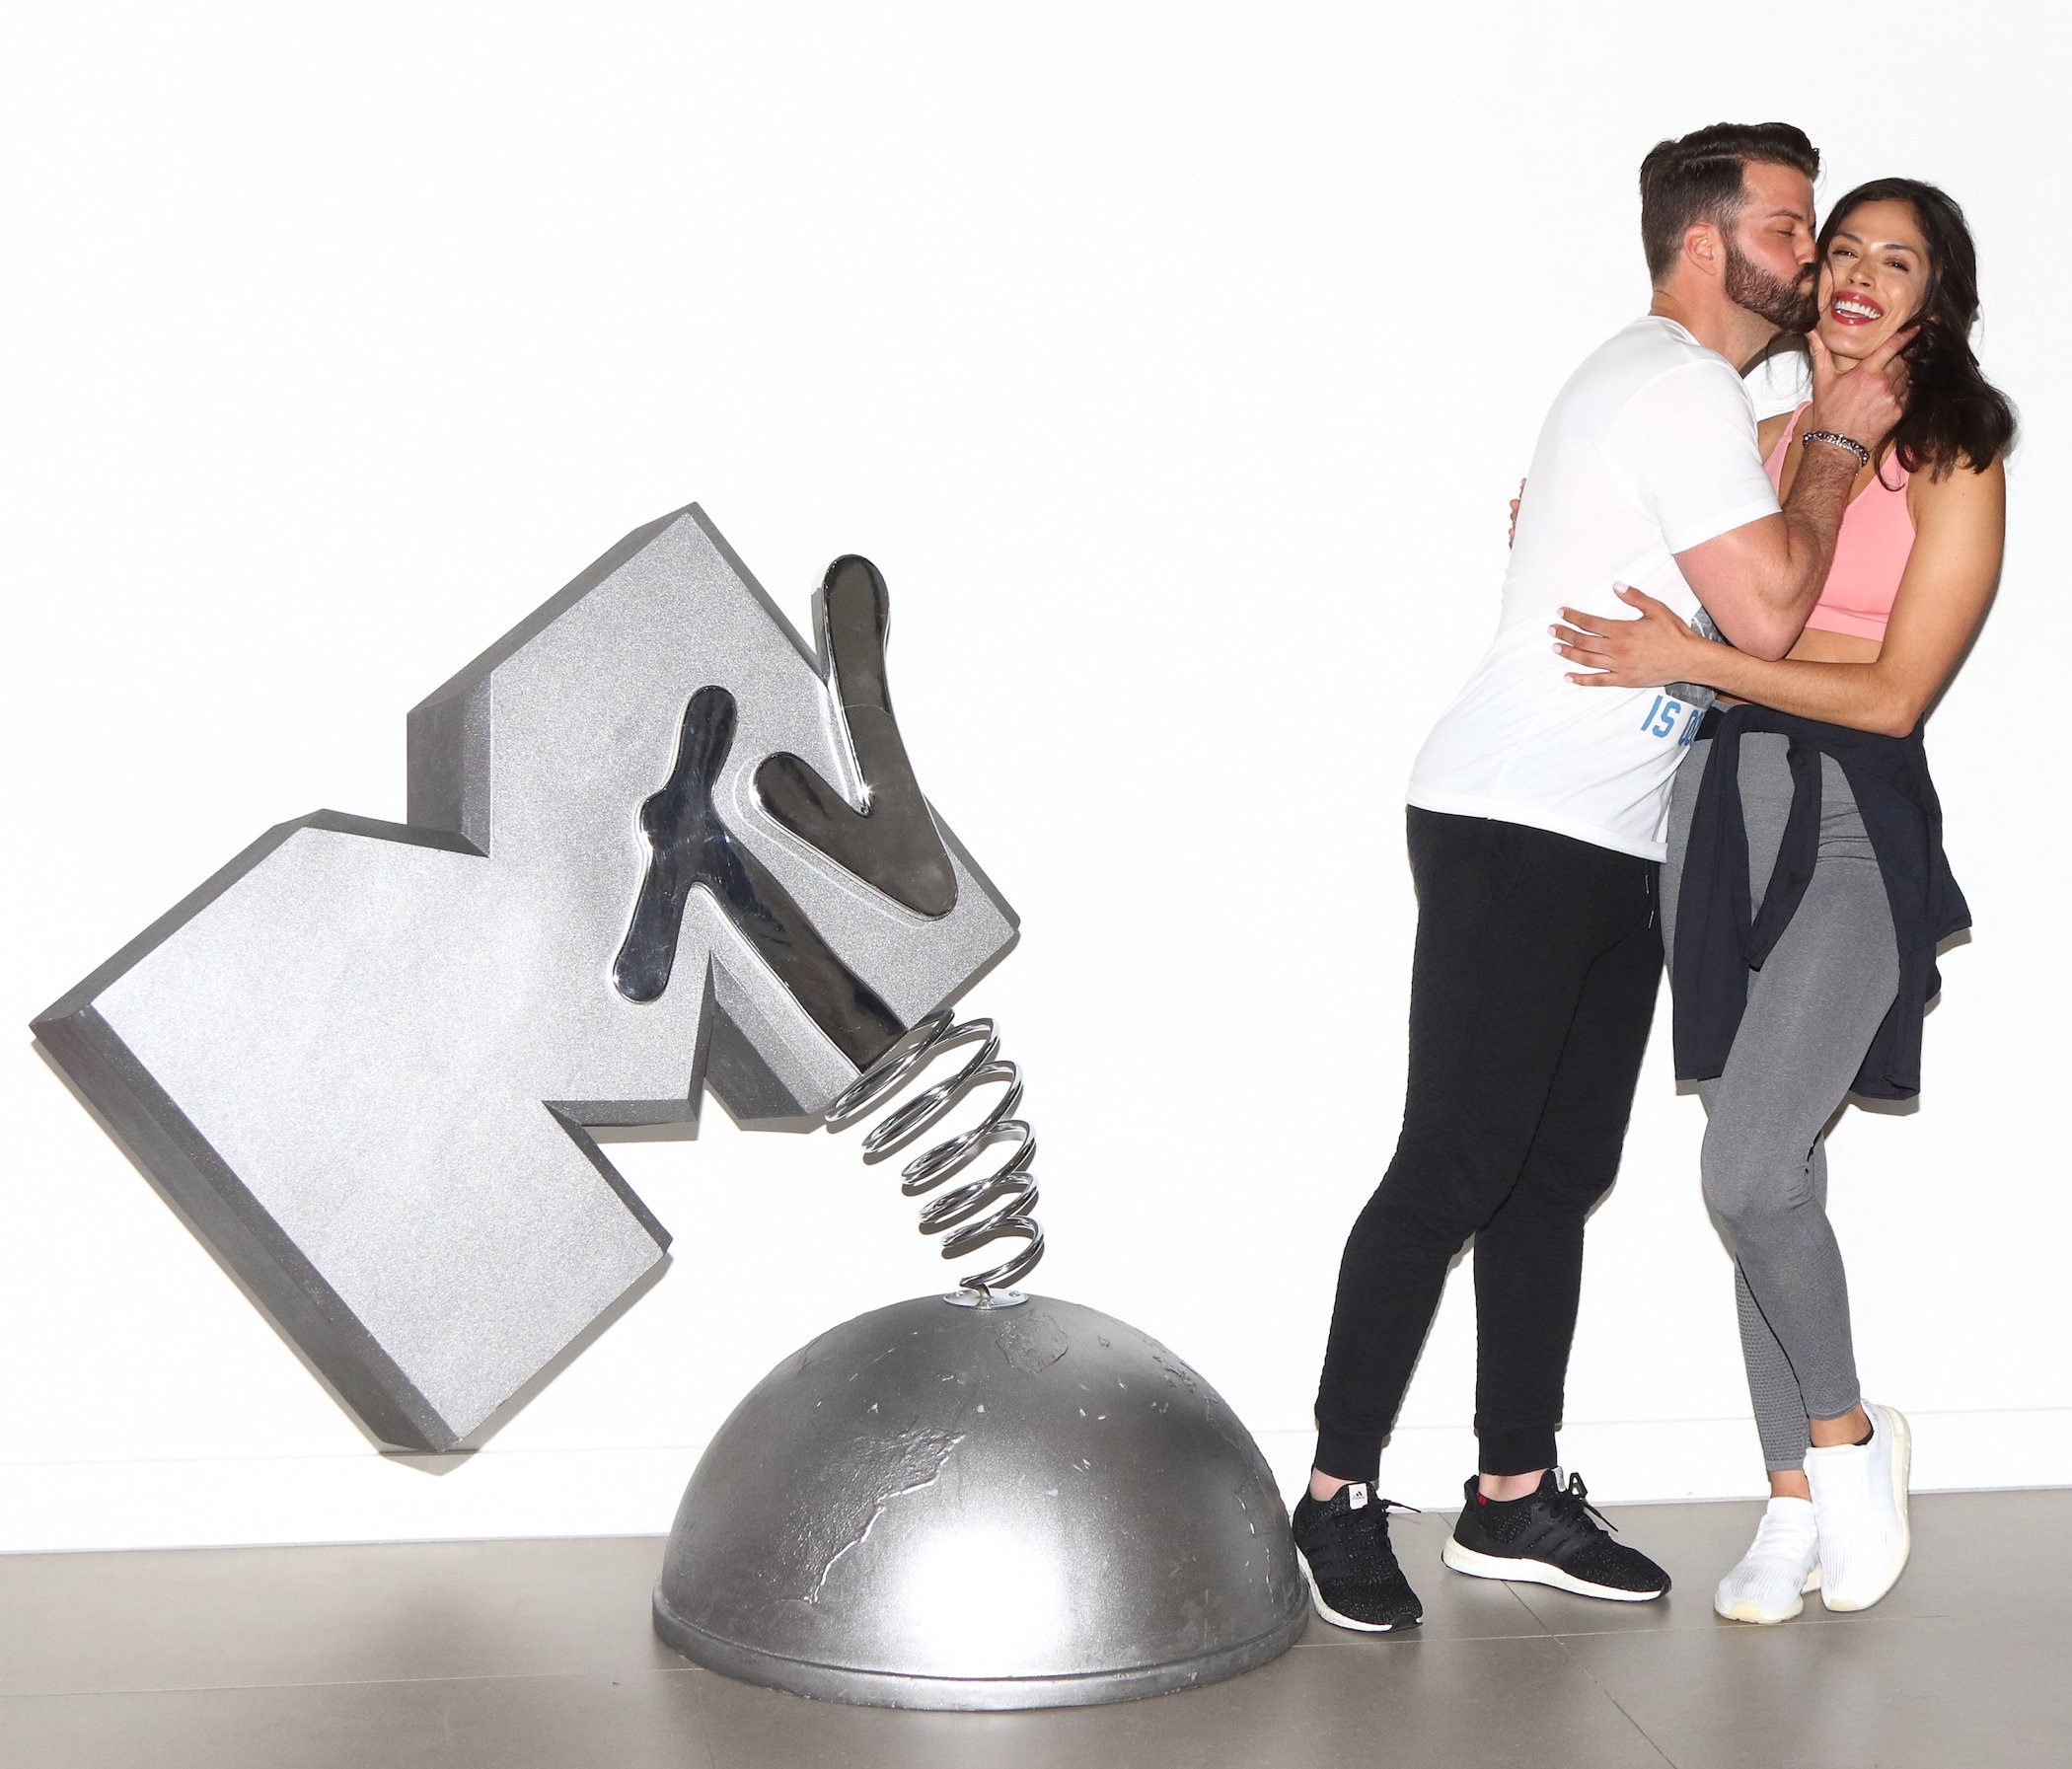 Johnny 'Bananas' Devenanzio from MTV's 'The Challenge' kissing Nany Gonzalez on the cheek while Nany laughs. They're standing next to a chrome MTV statue.